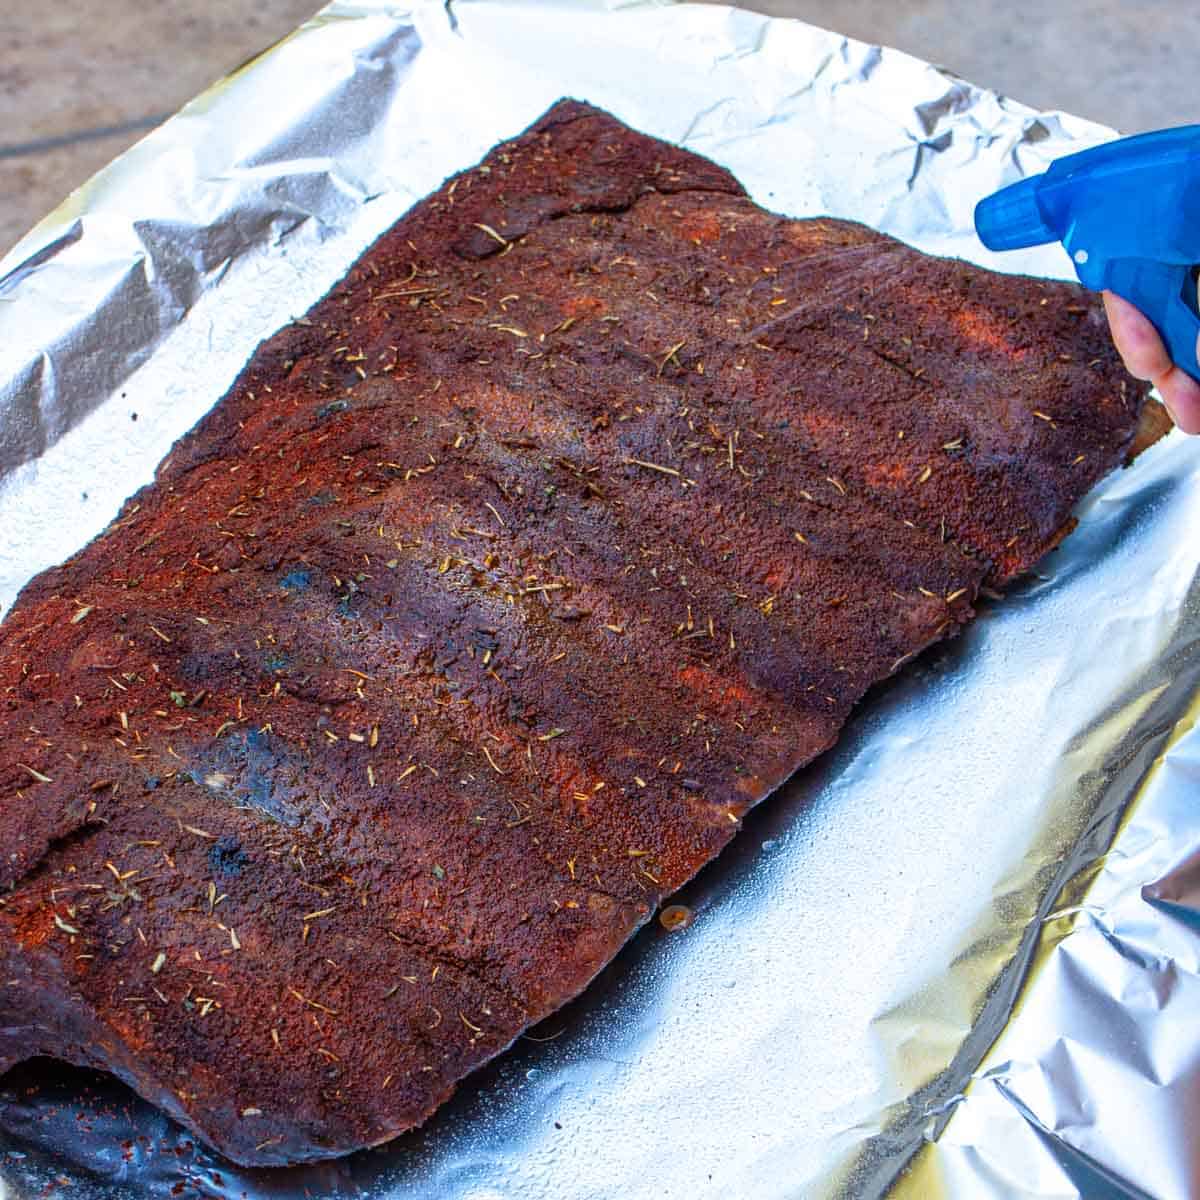 Ribs after time on smoke being spritzed with vinegar water mix just before wrapping in foil with caption.